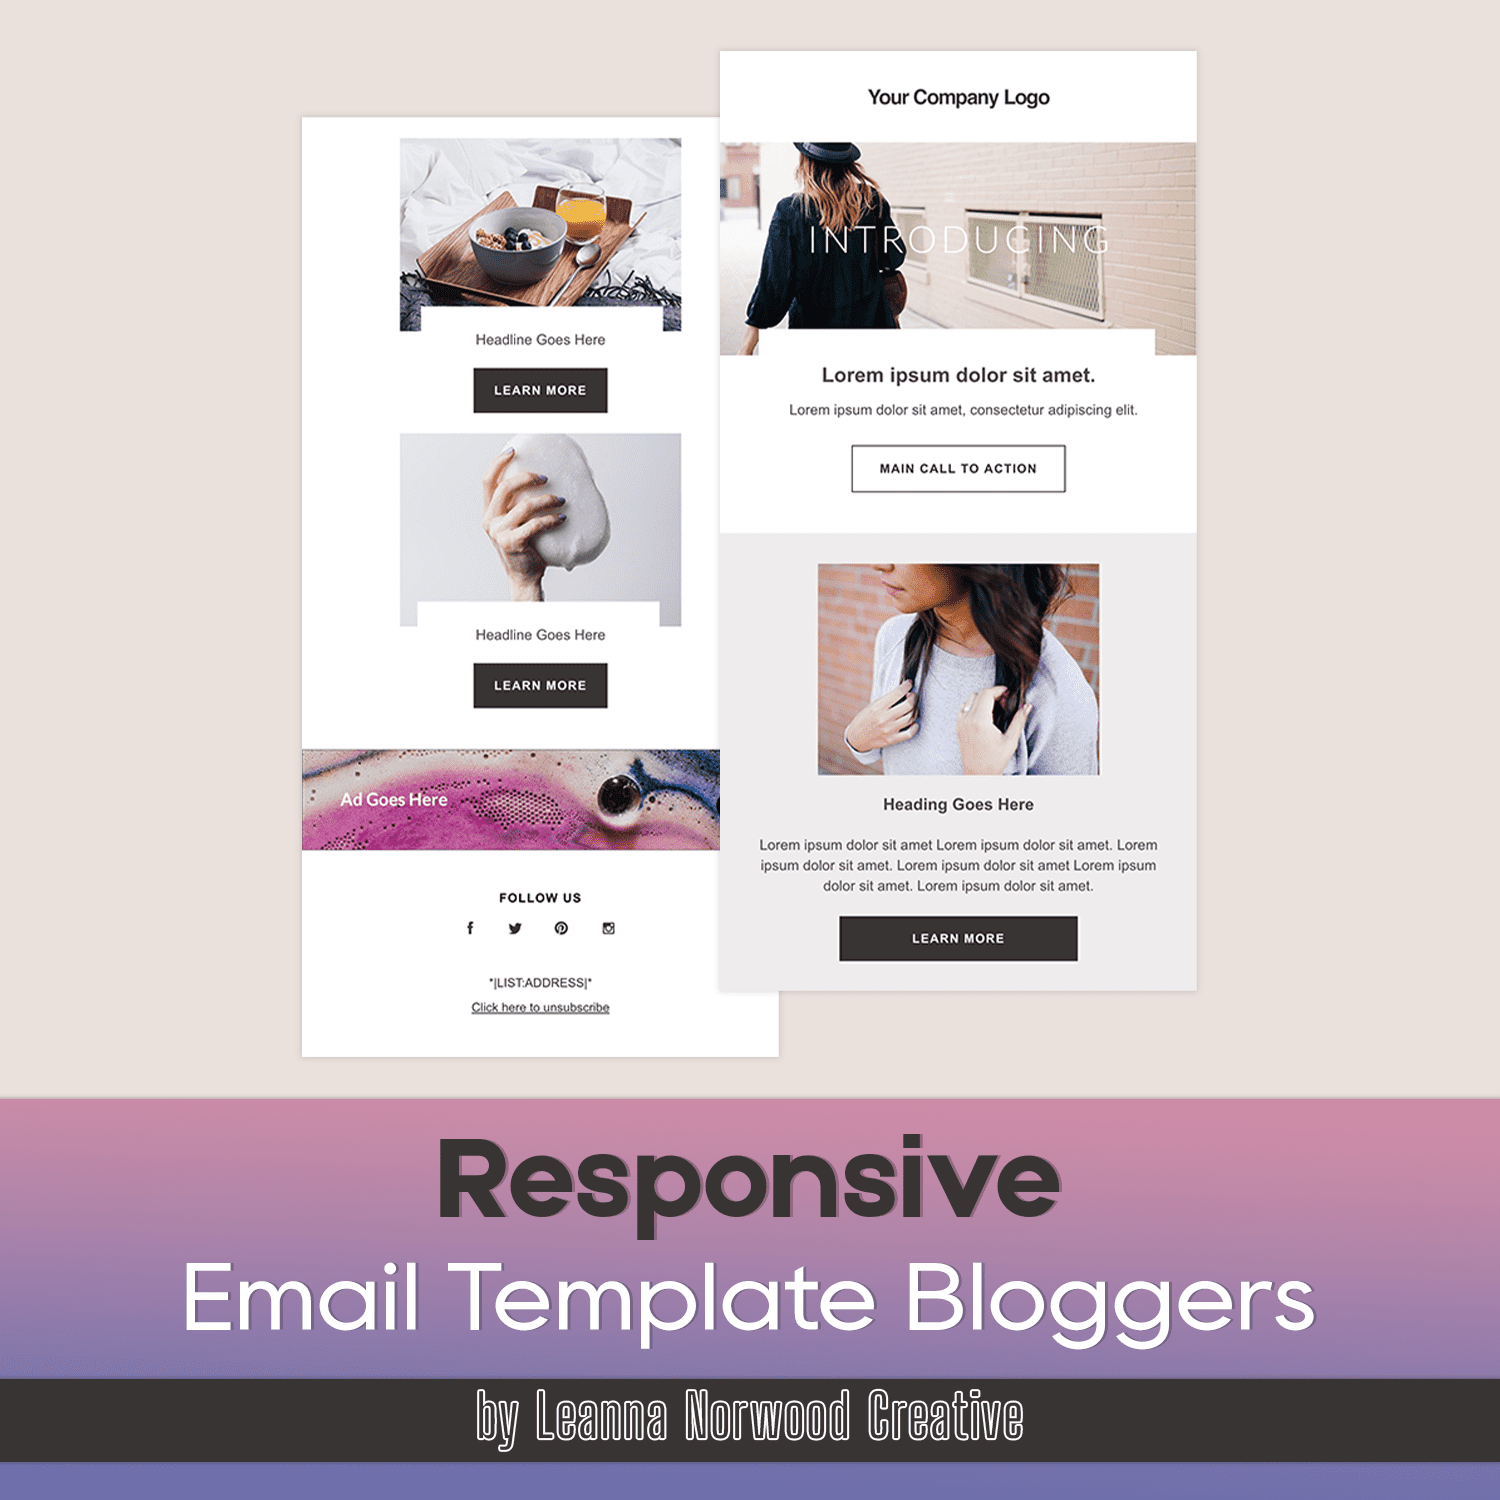 Bundle image of enchanting email design template for bloggers.